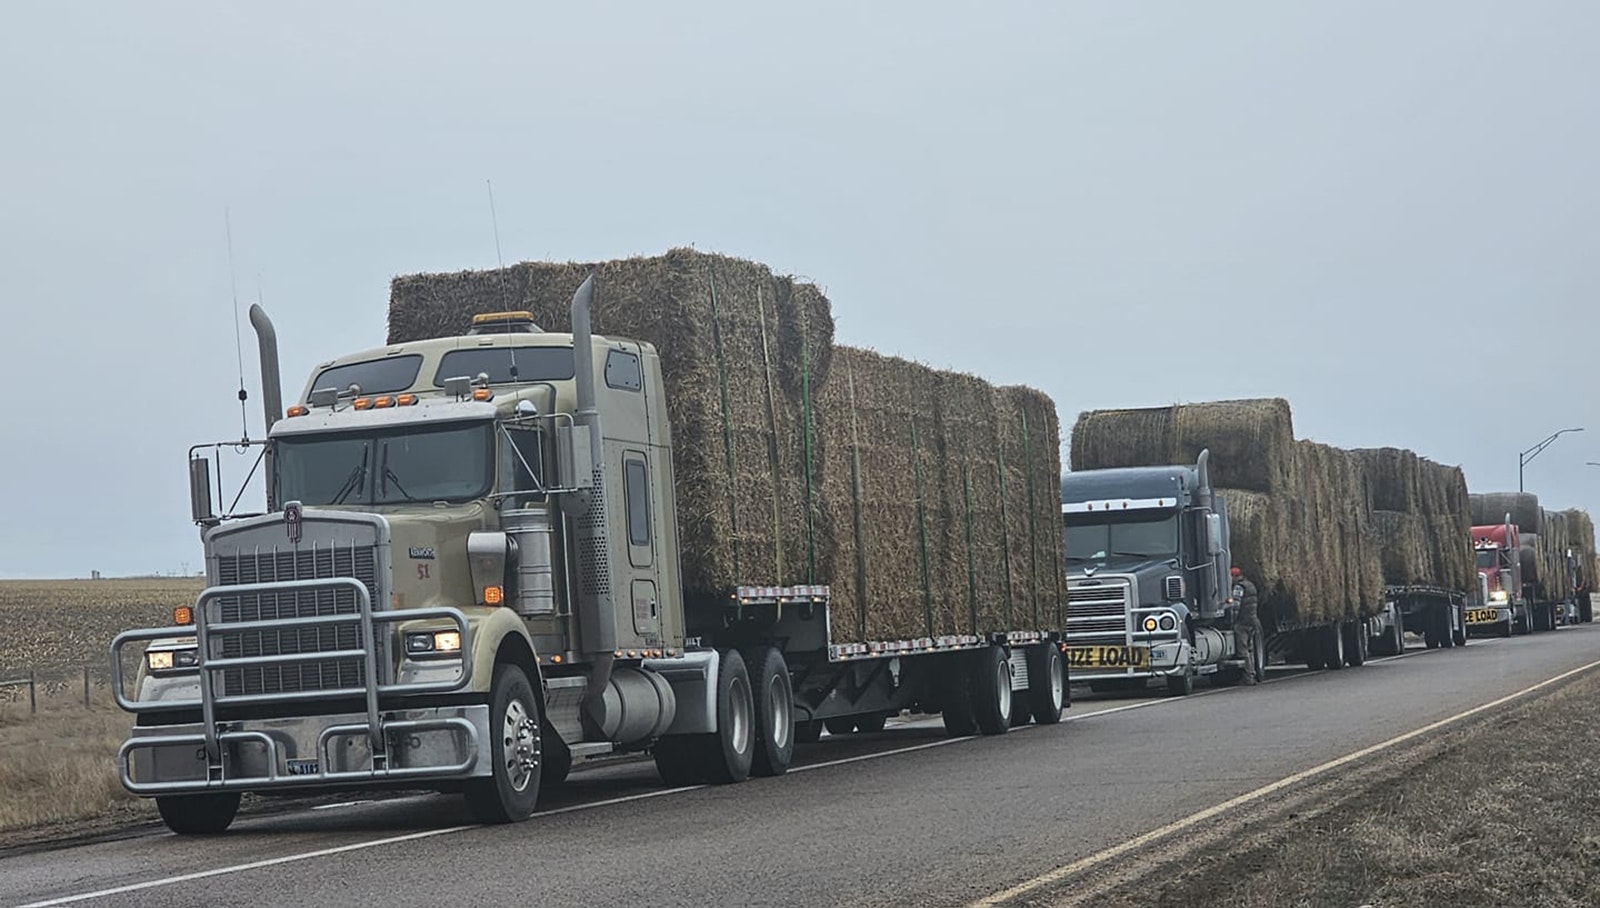 Stopping to check straps on hay bales headed to Texas from Wyoming.